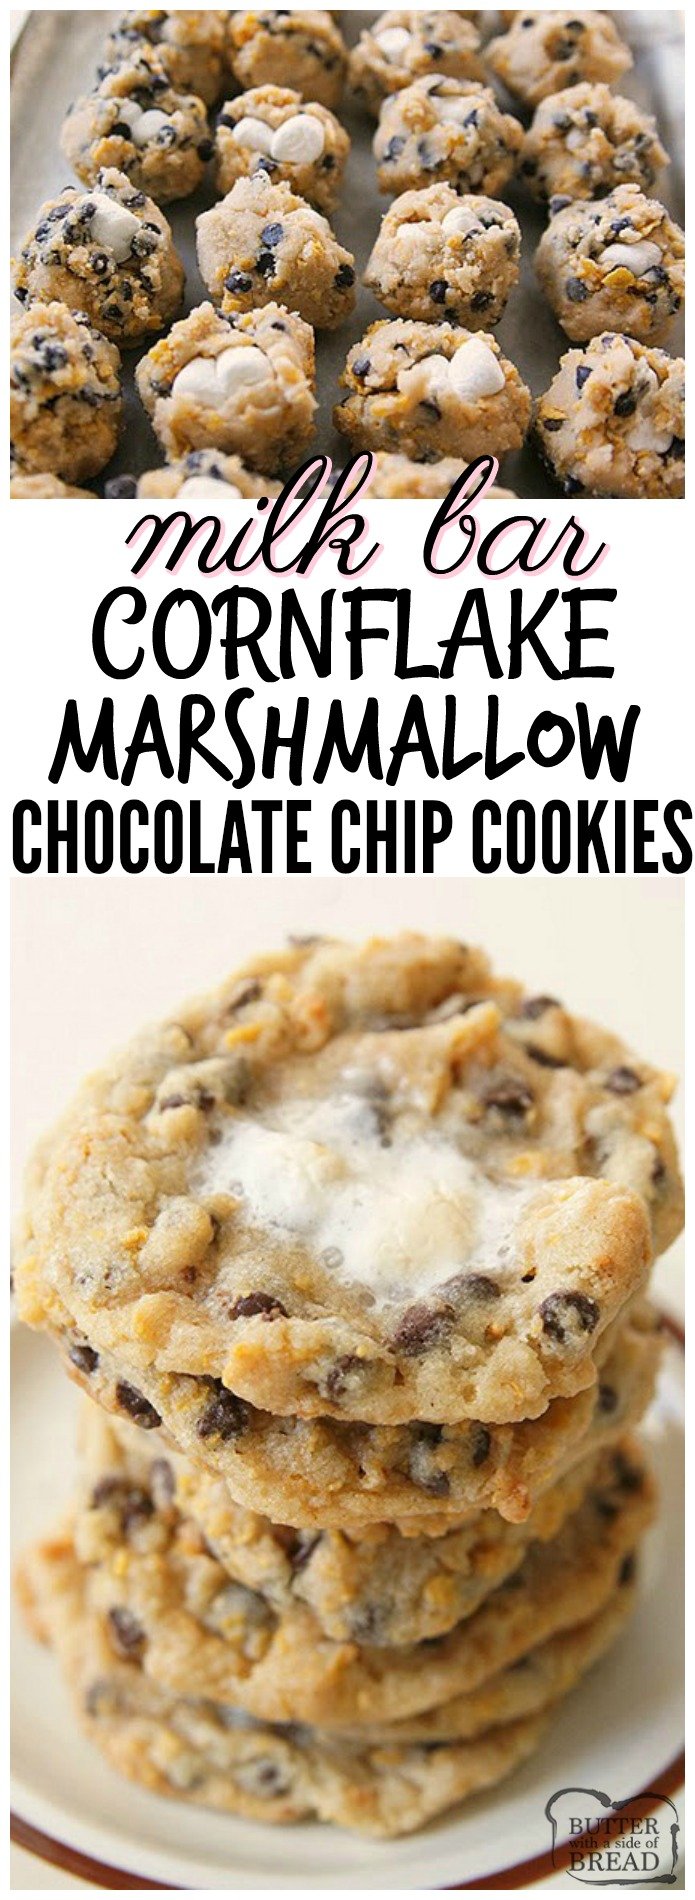 Milk Bar Cornflake Marshmallow Cookies just like the ones served in Momofuku Milk Bar in NYC! I think my version is even BETTER...and they're easier to make! See my tips and tricks on making these incredible cornflake chocolate chip cookies in your own kitchen.